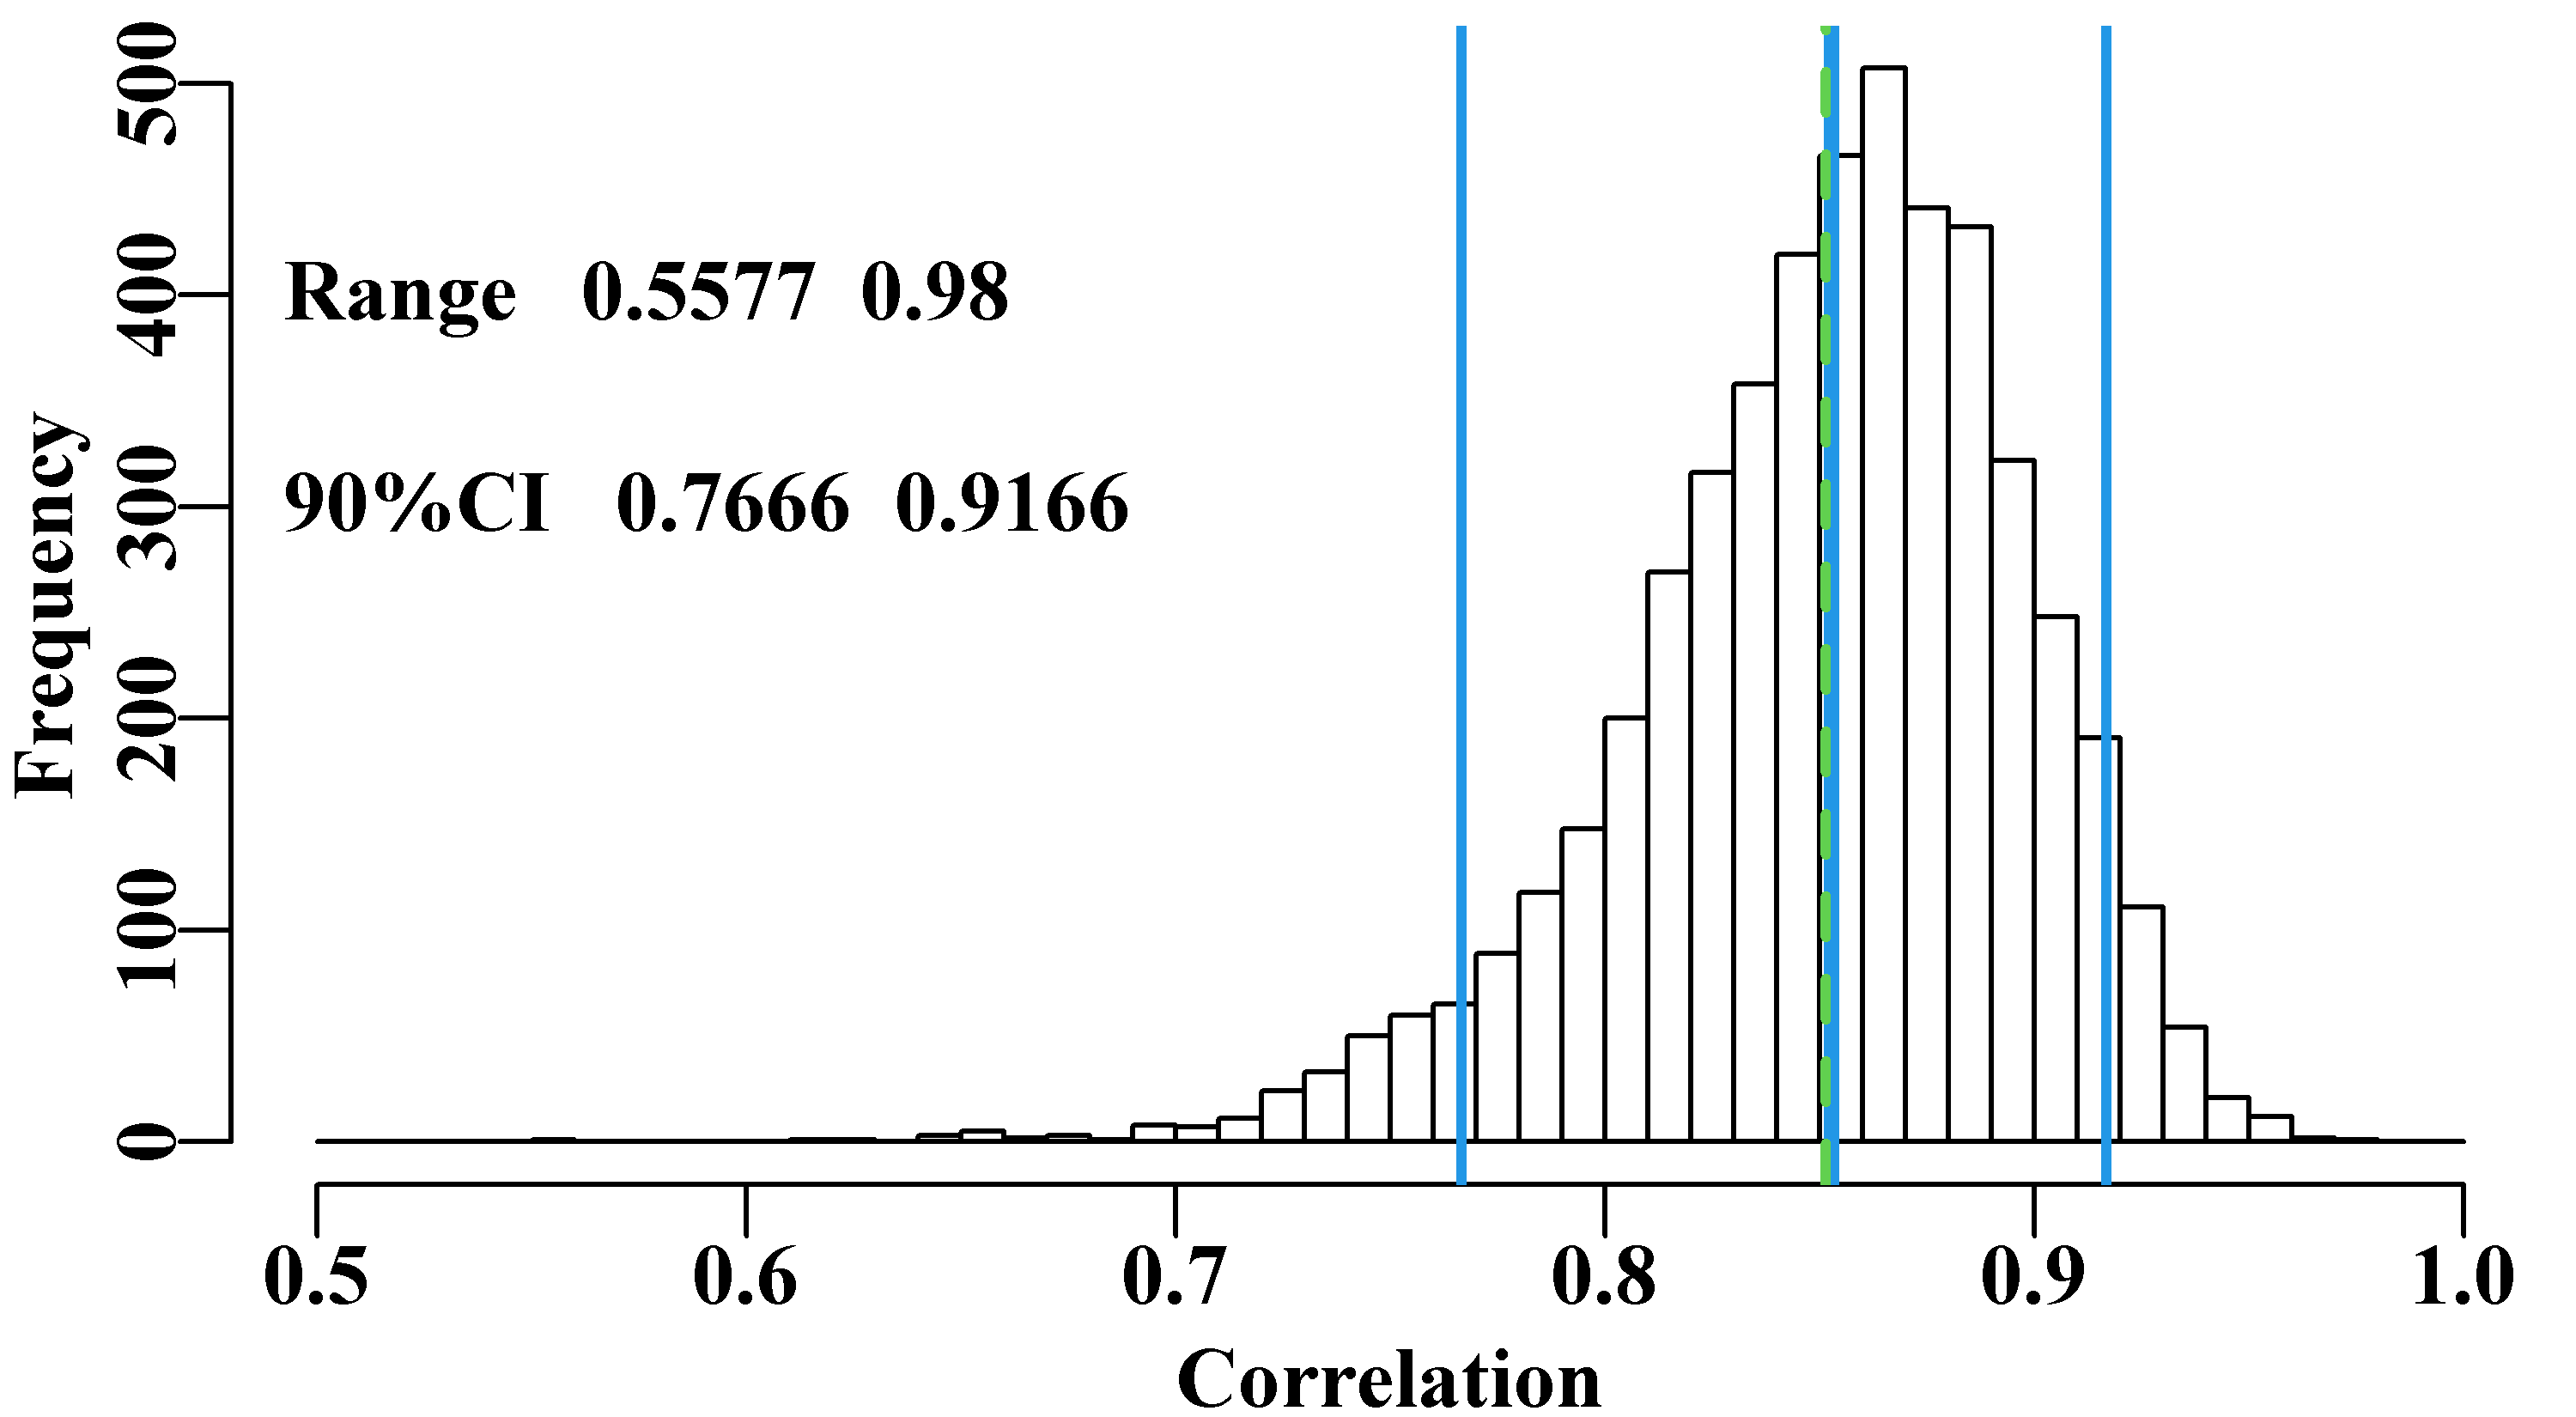 5000 bootstrap estimates of the correlation between Endeavour and Tiger prawn catches with the original mean in dashed green and bootstrap mean and 90% CI in solid blue. Possible negative correlations have been removed for plotting purposes (though none occurred).